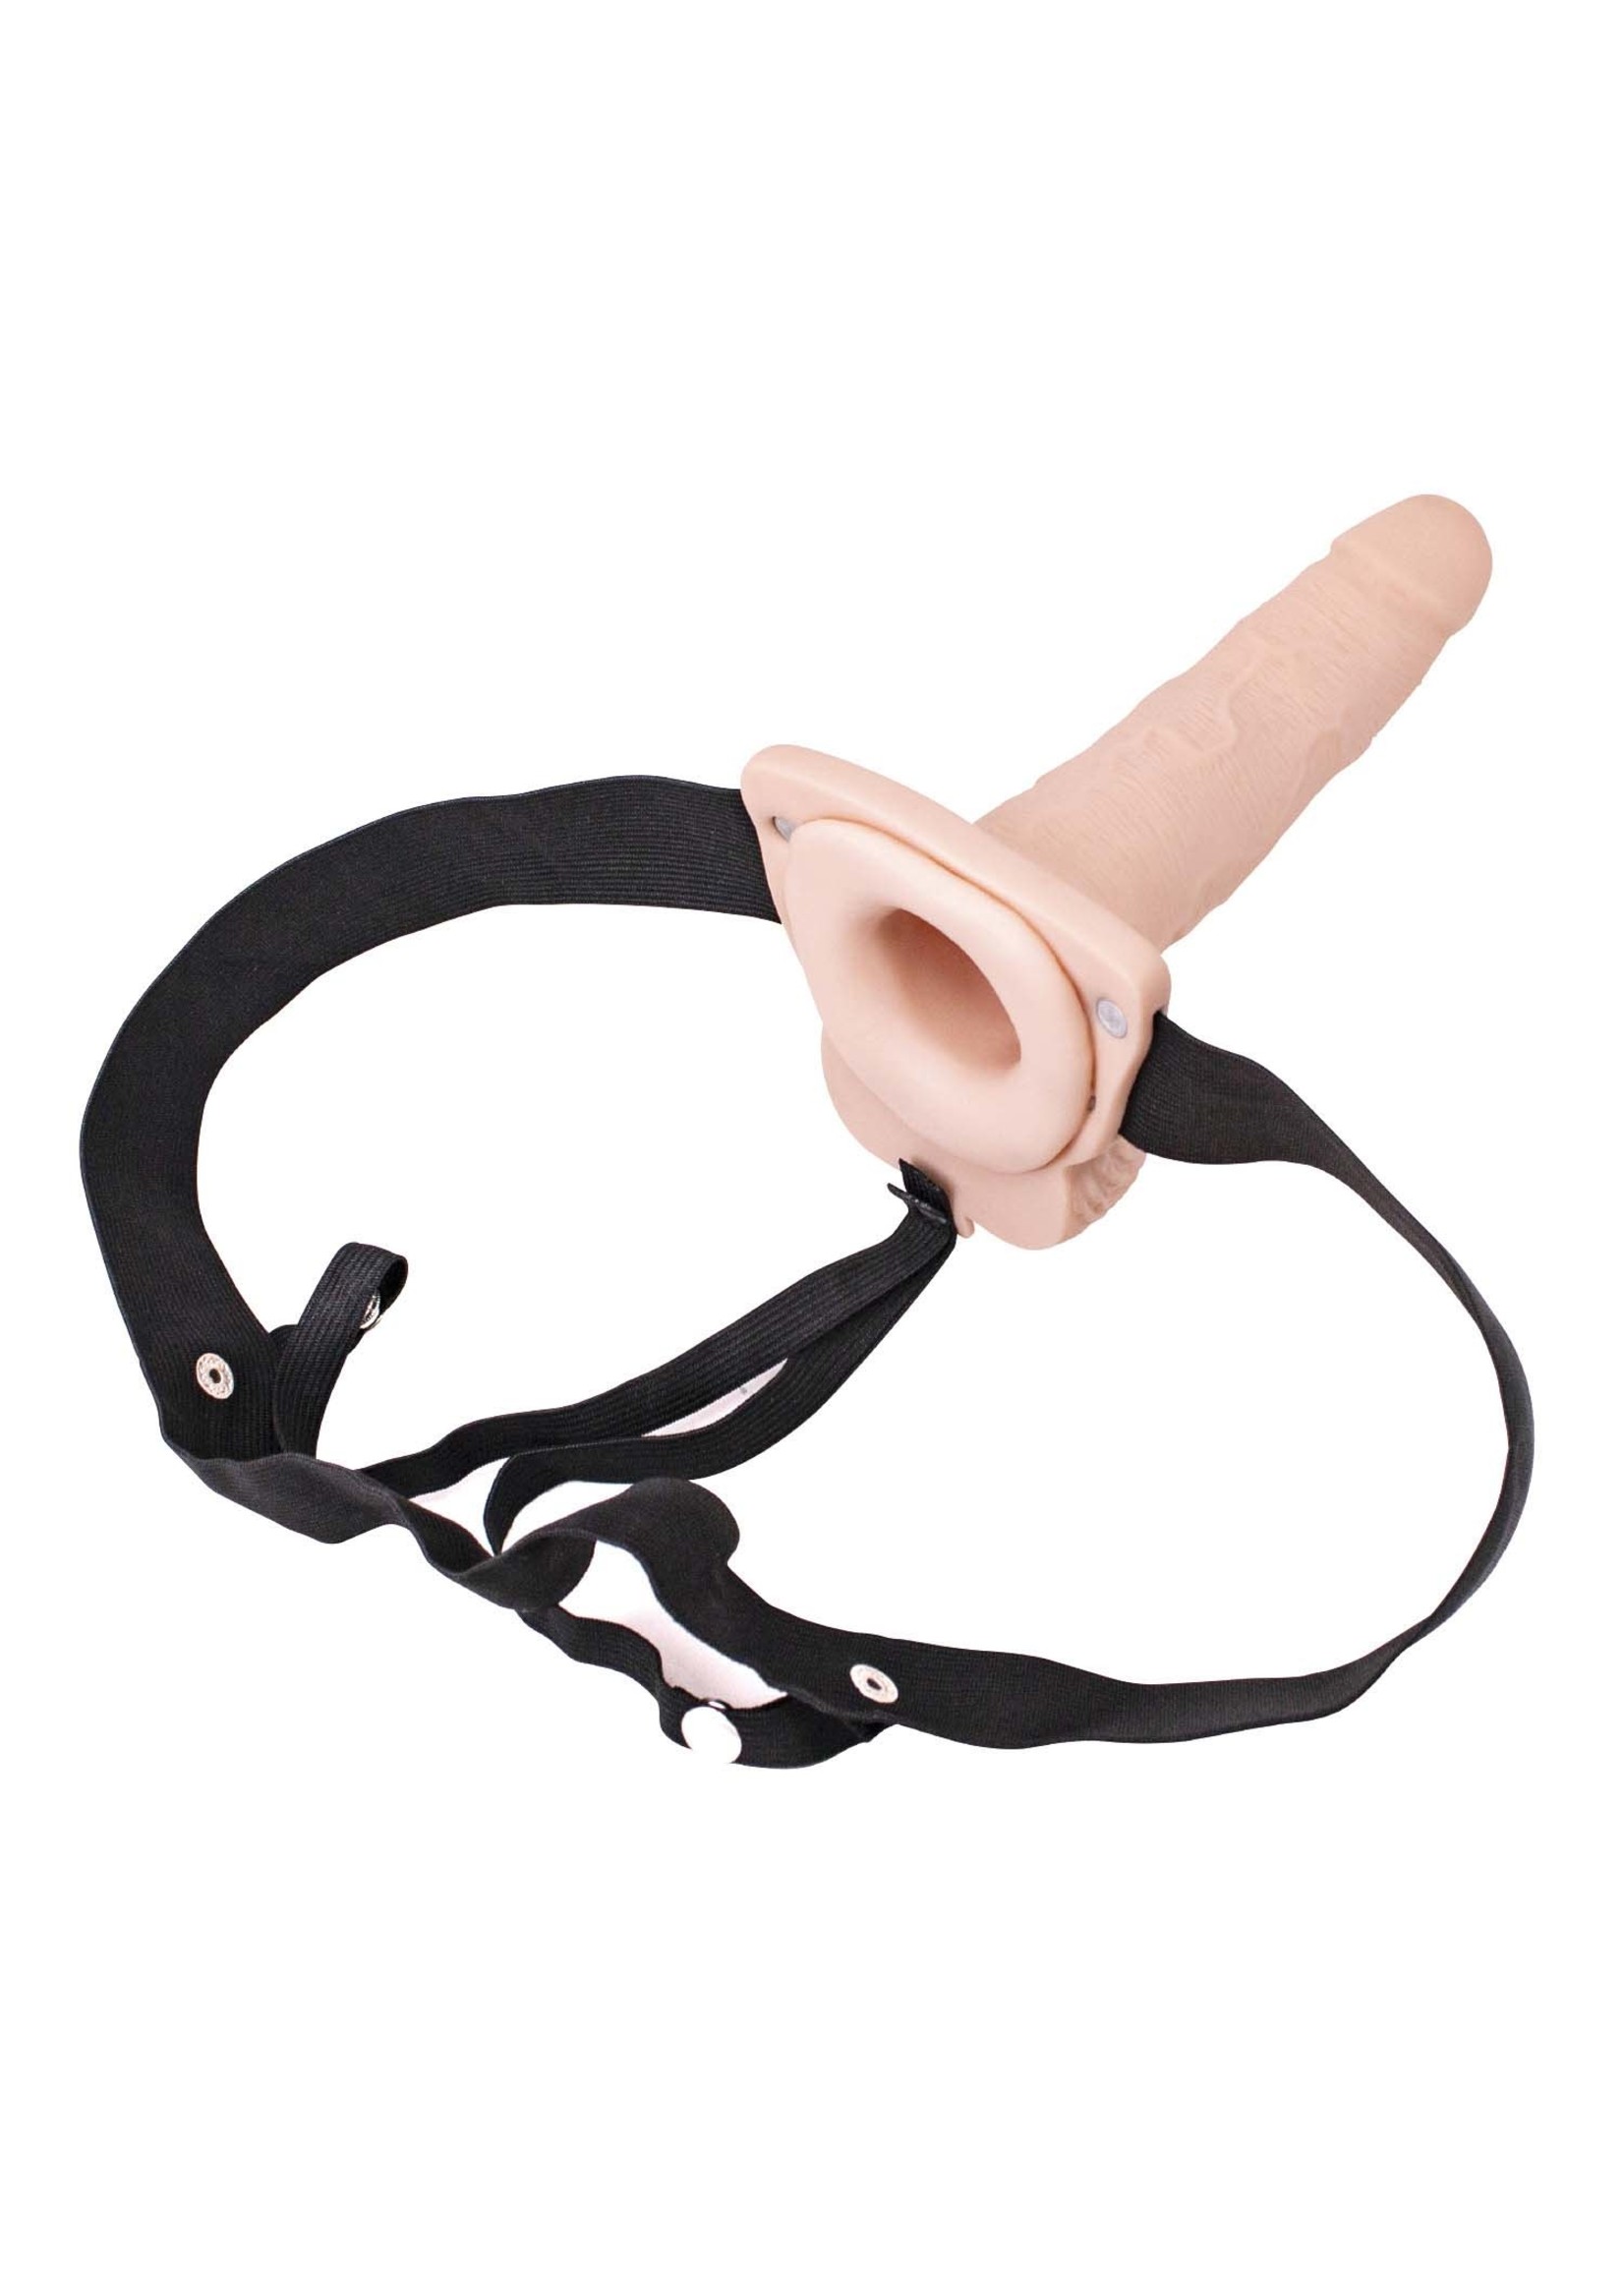 Nasstoys Erection Assistant Hollow Strap-On 6″ Vibrating